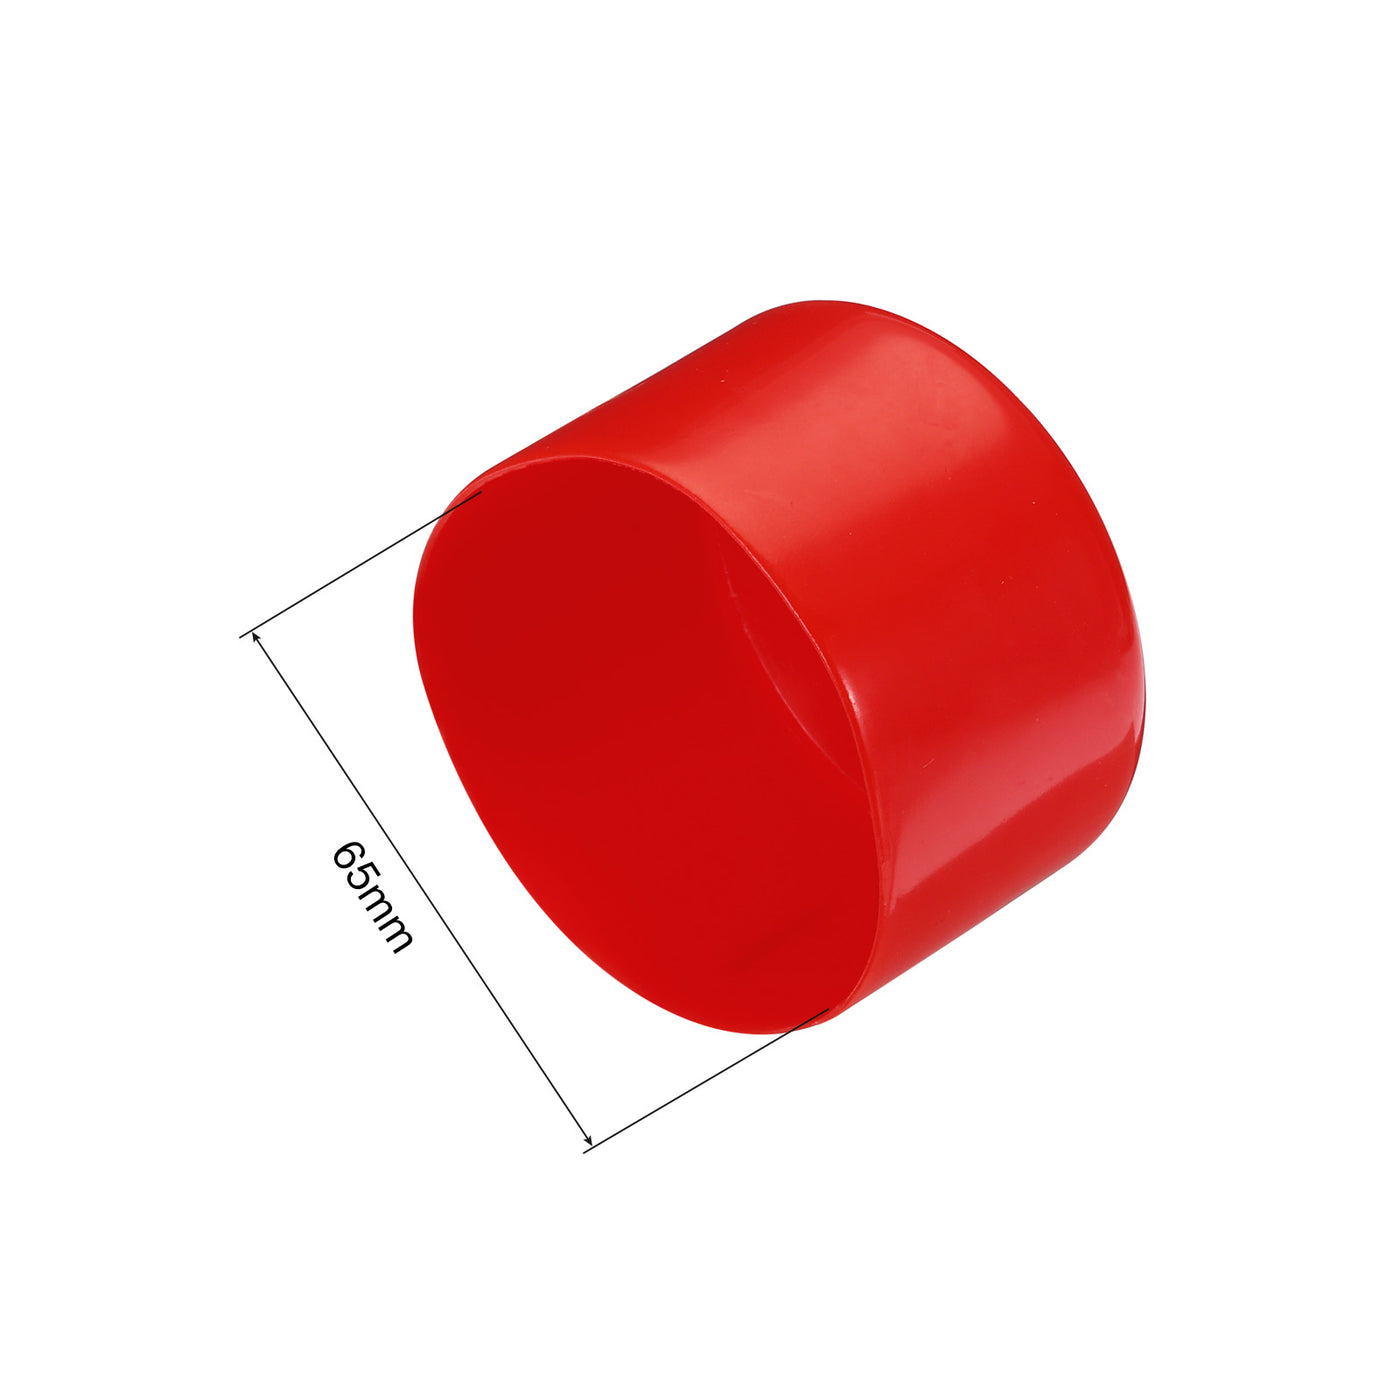 uxcell Uxcell 4pcs Rubber End Caps 65mm ID Vinyl Round Tube Bolt Cap Cover Screw Thread Protectors Red